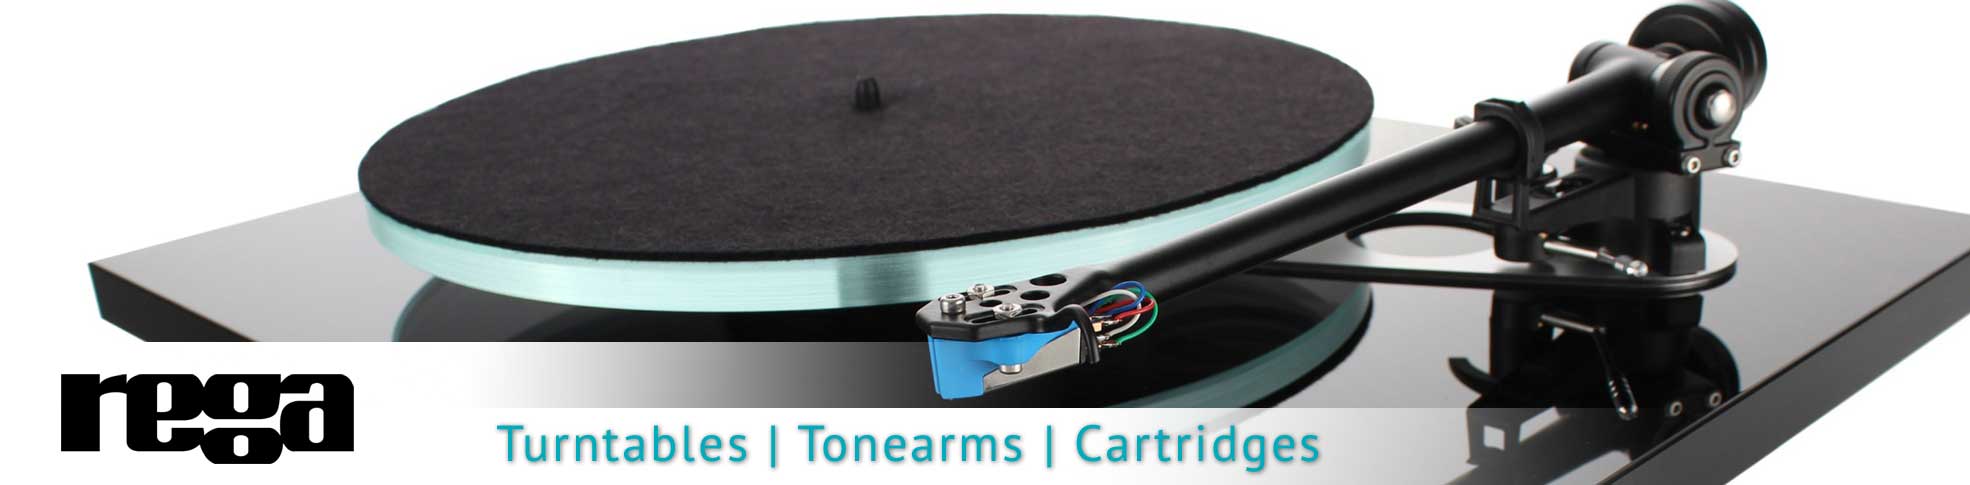 Rega turntables and other brands of turntables, cartridges and analog gear in Orlando, FL